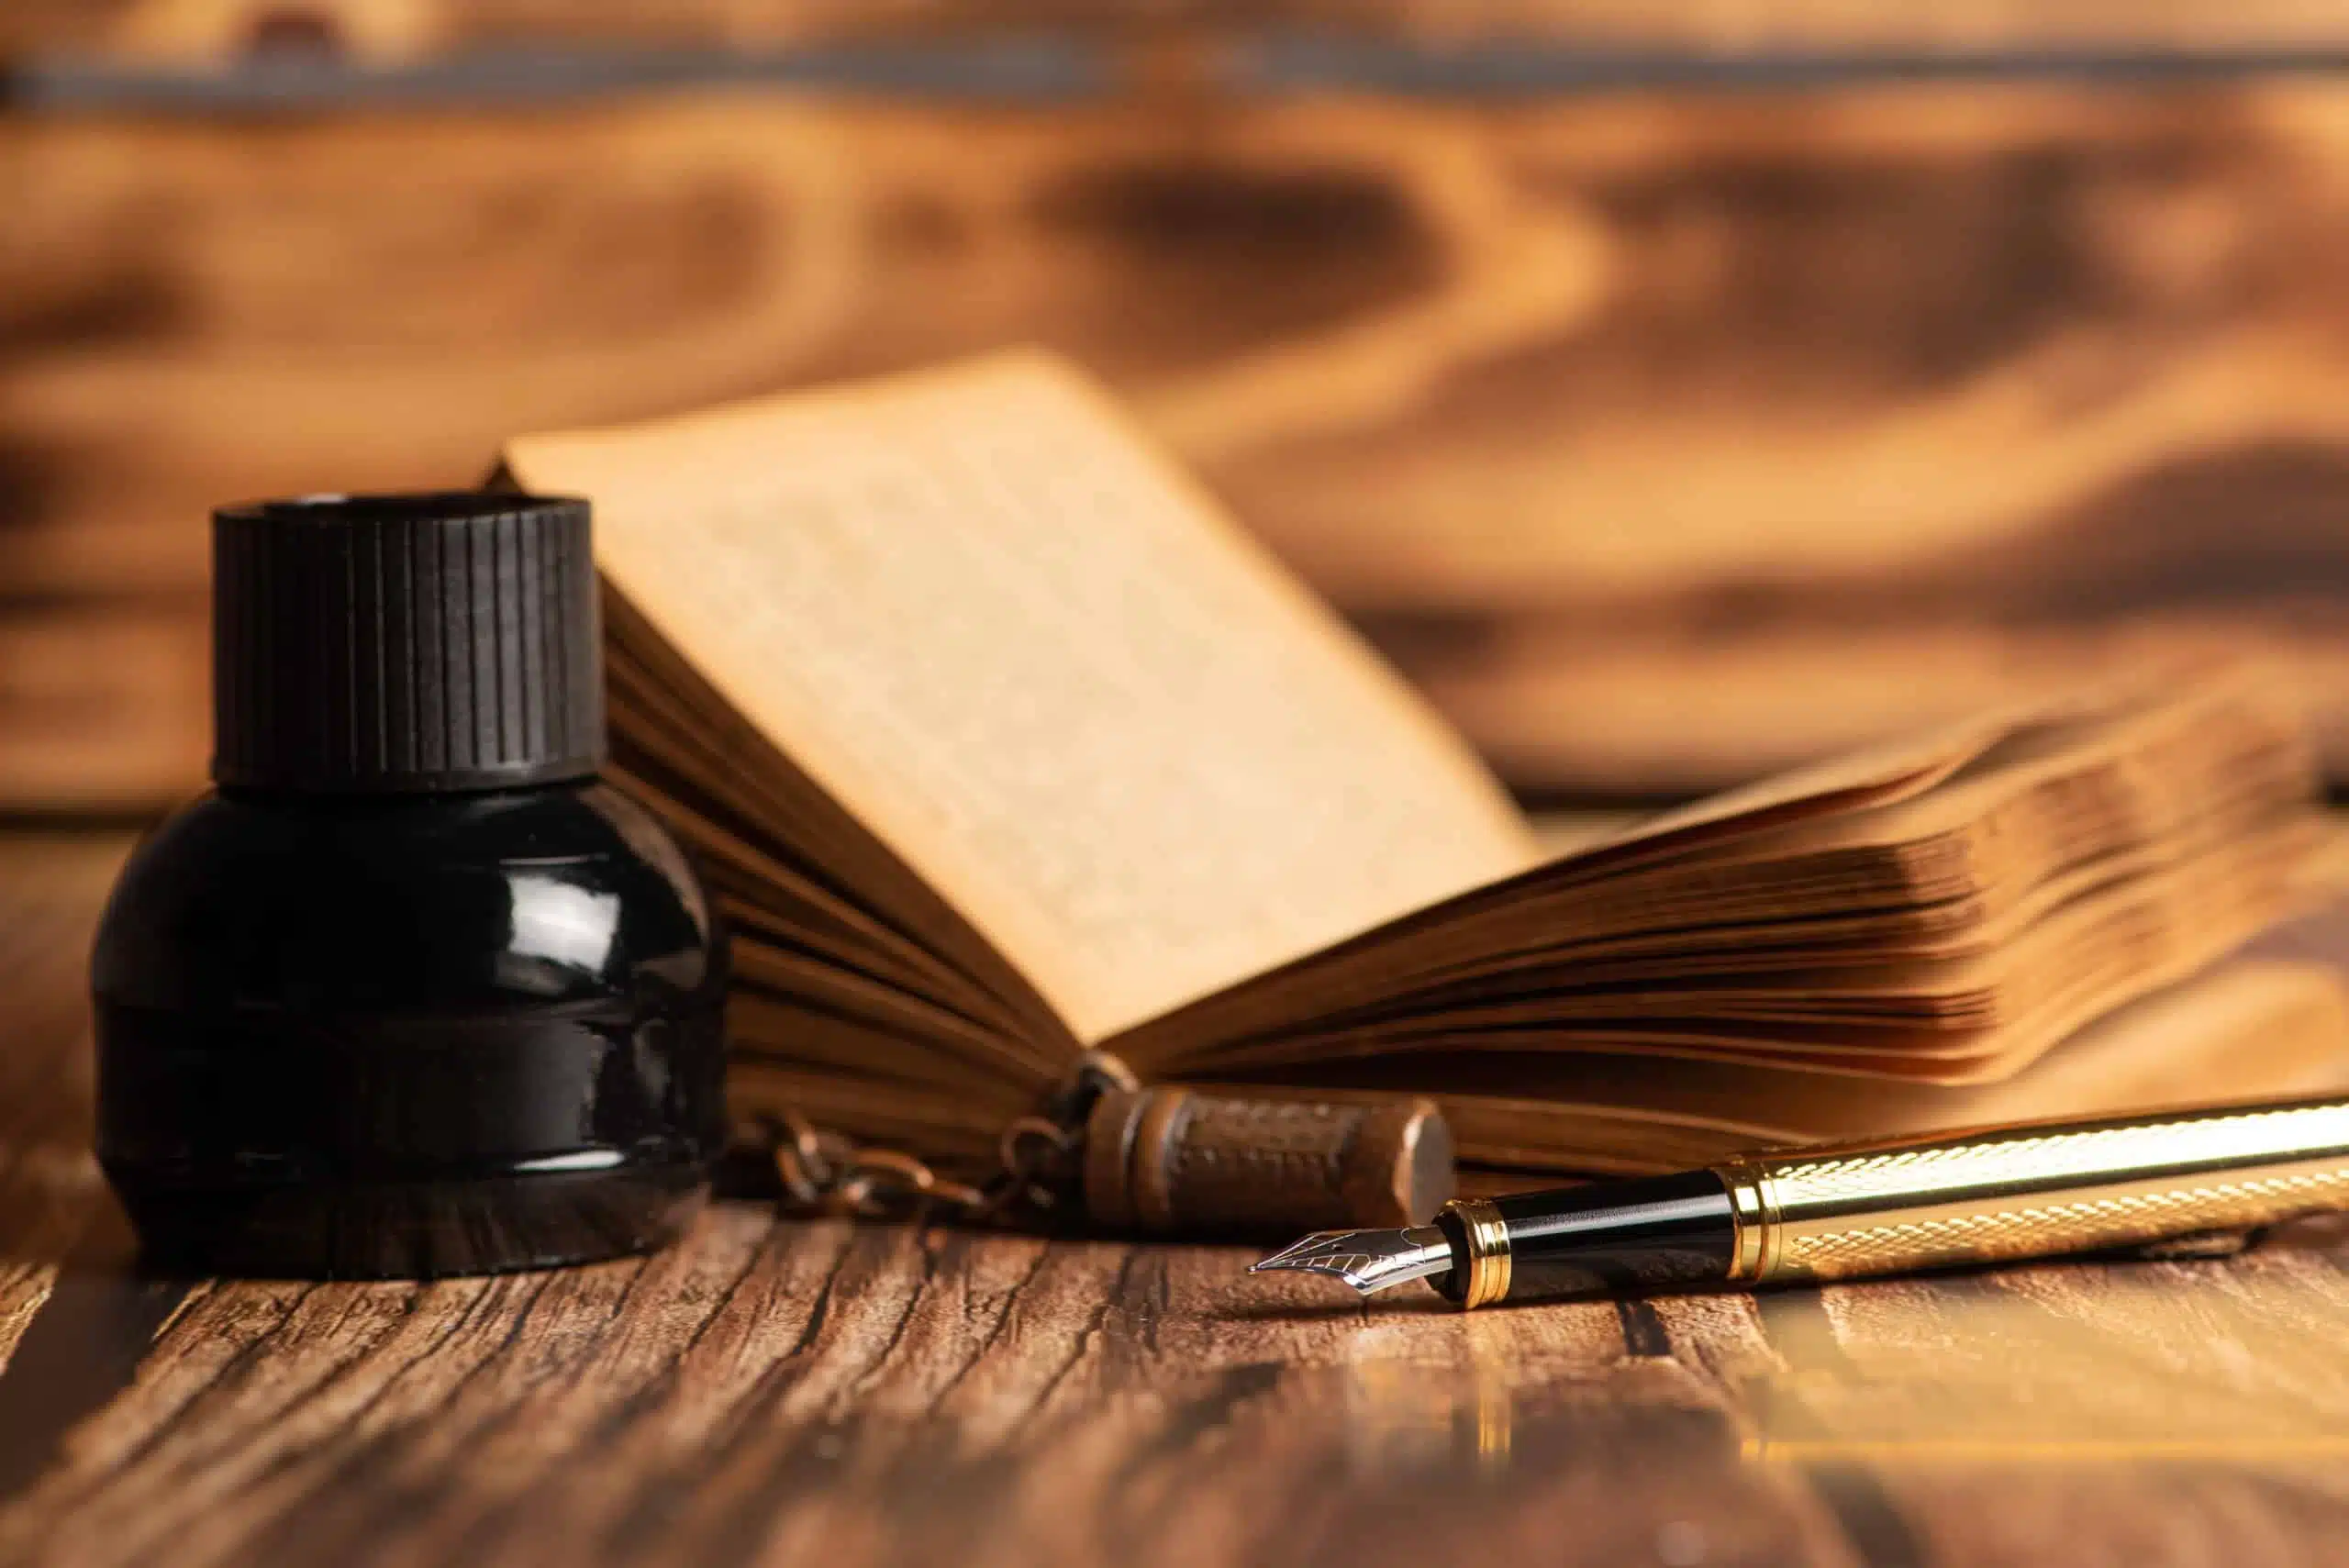 Beautiful fountain pen, book, and inkwell on wooden table.